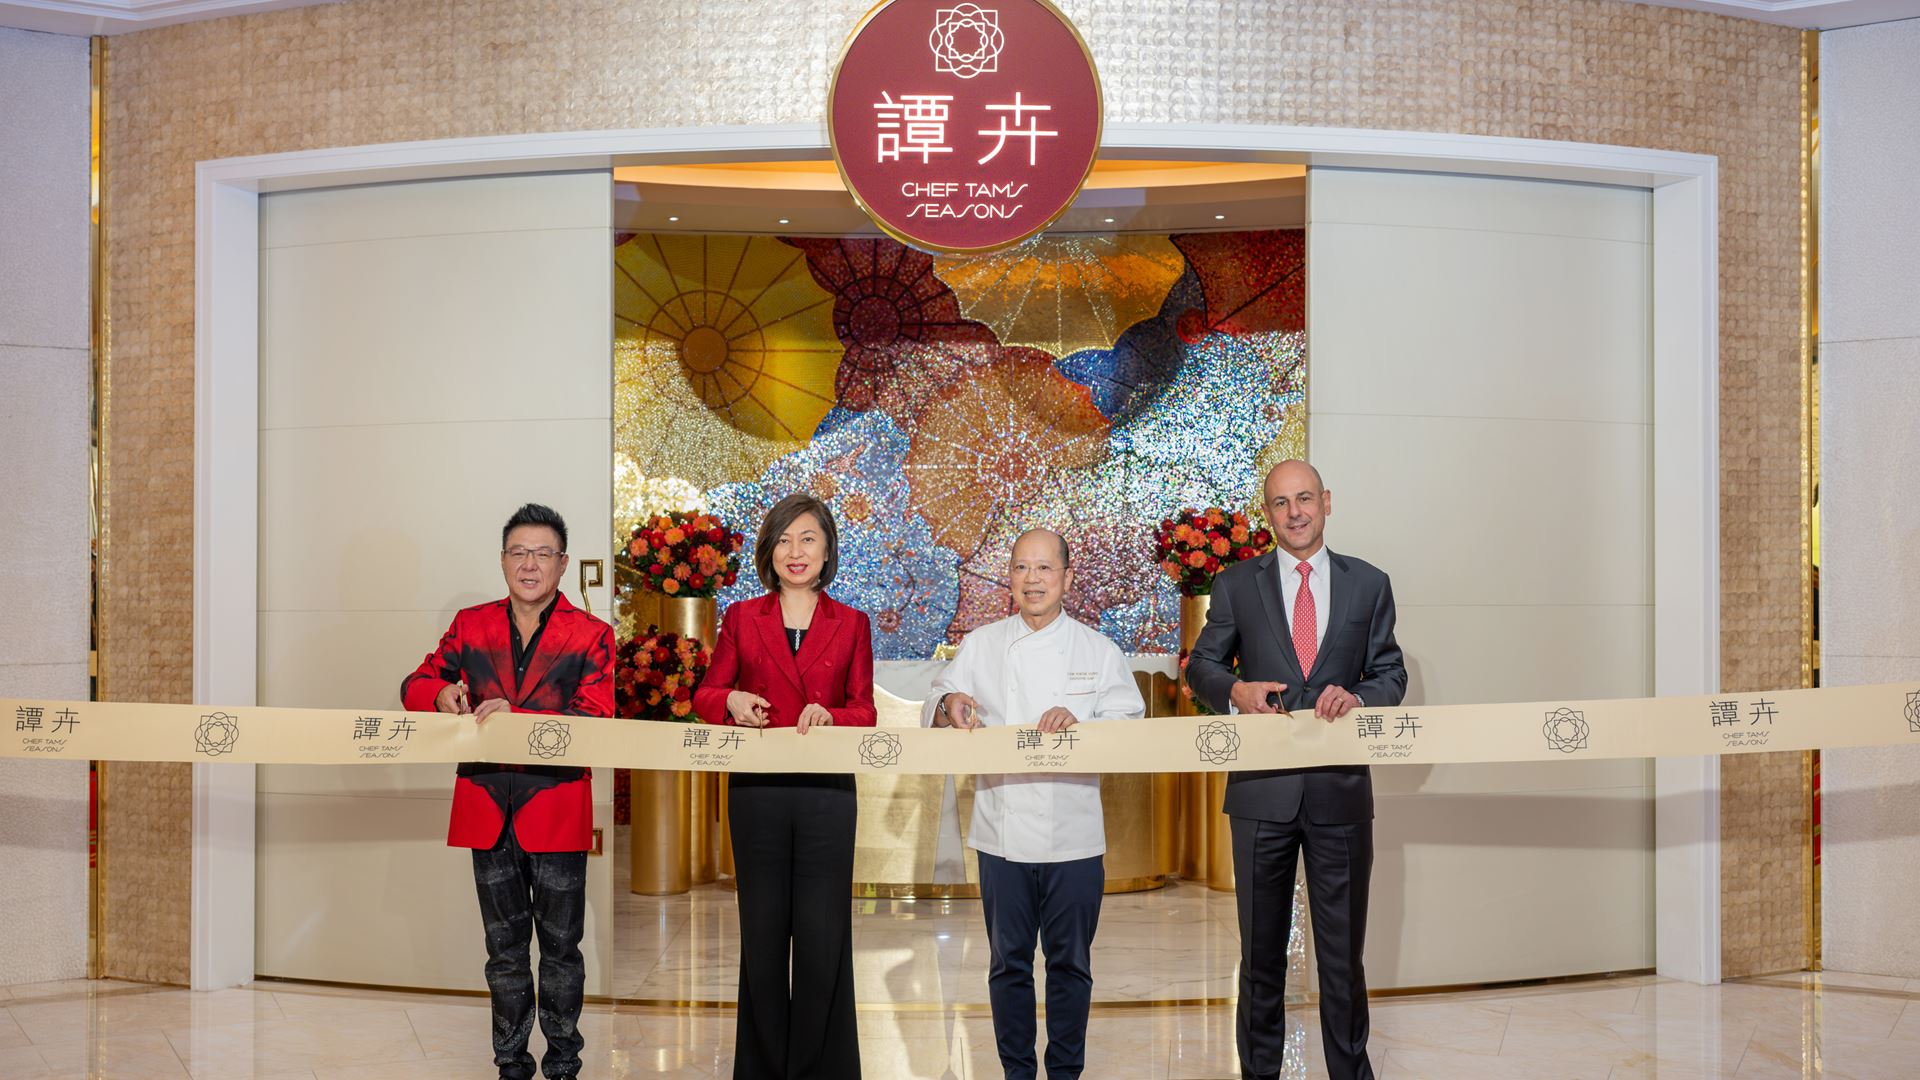 Cantonese Master Chef Tam Kwok Fung, the Wynn management team, and legendary singer Johnny Jiang jointly unveil "Chef...